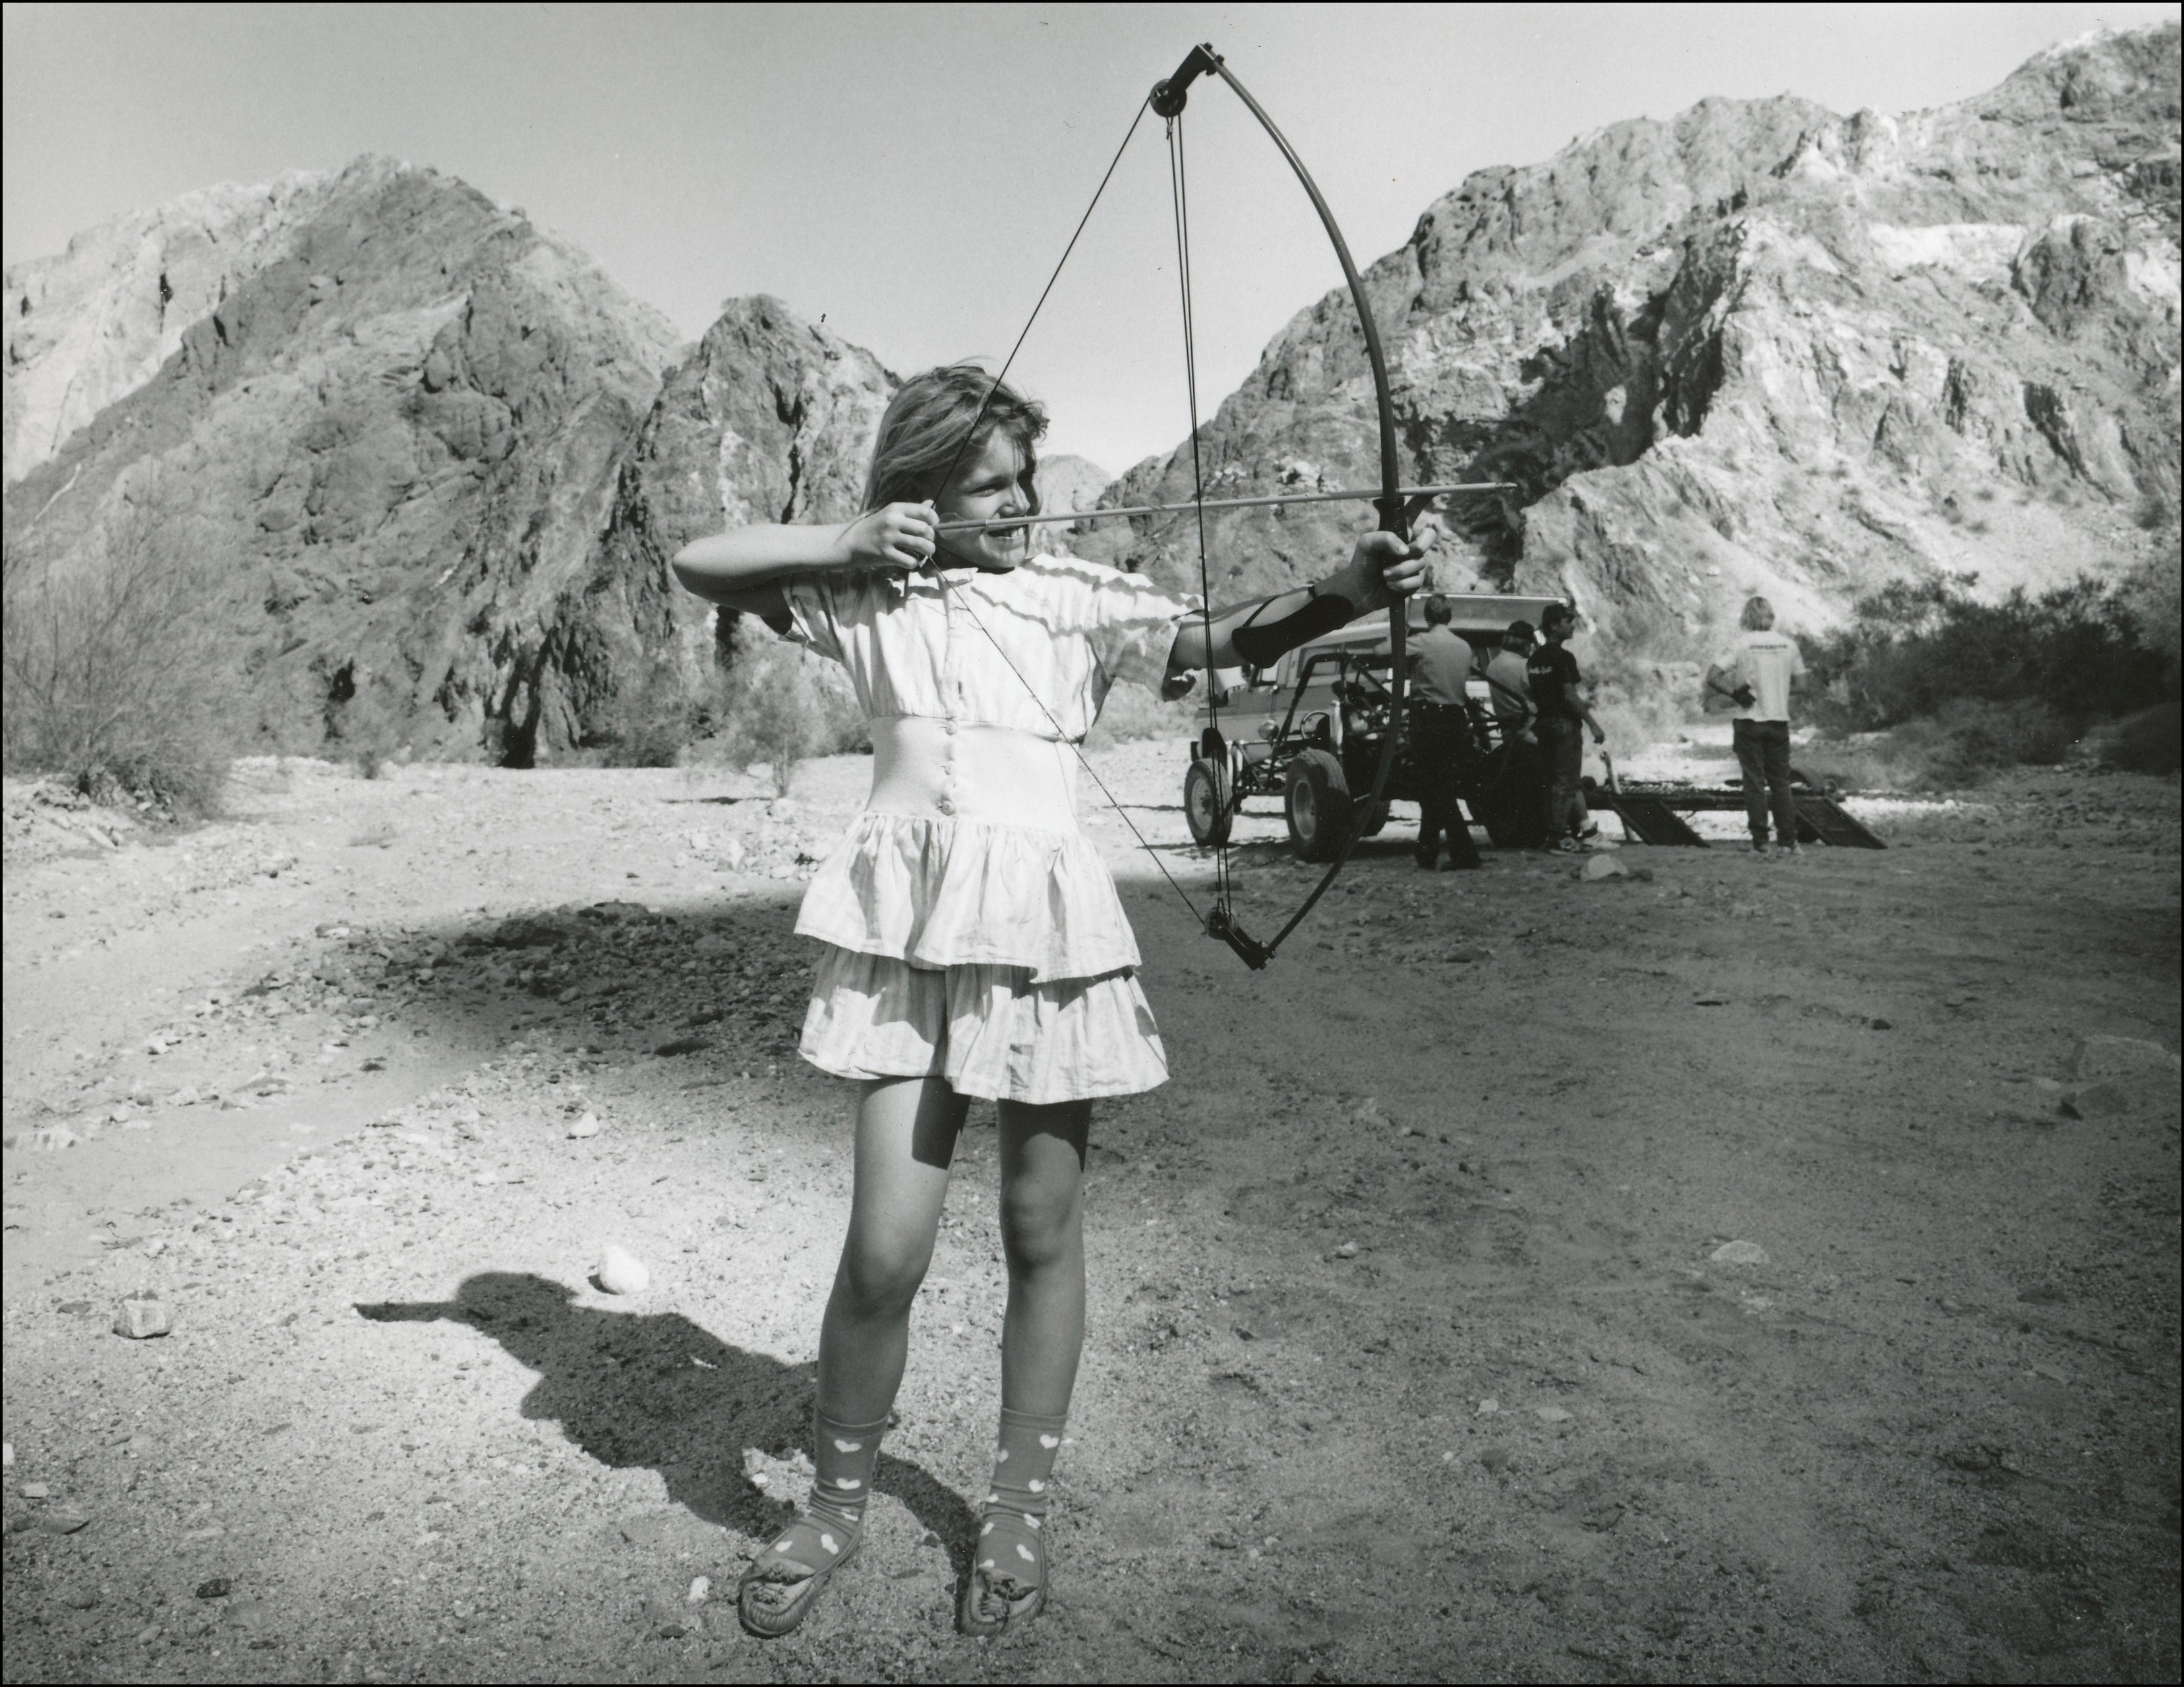 Young girl in dress aiming an old fashioned bow and arrow 